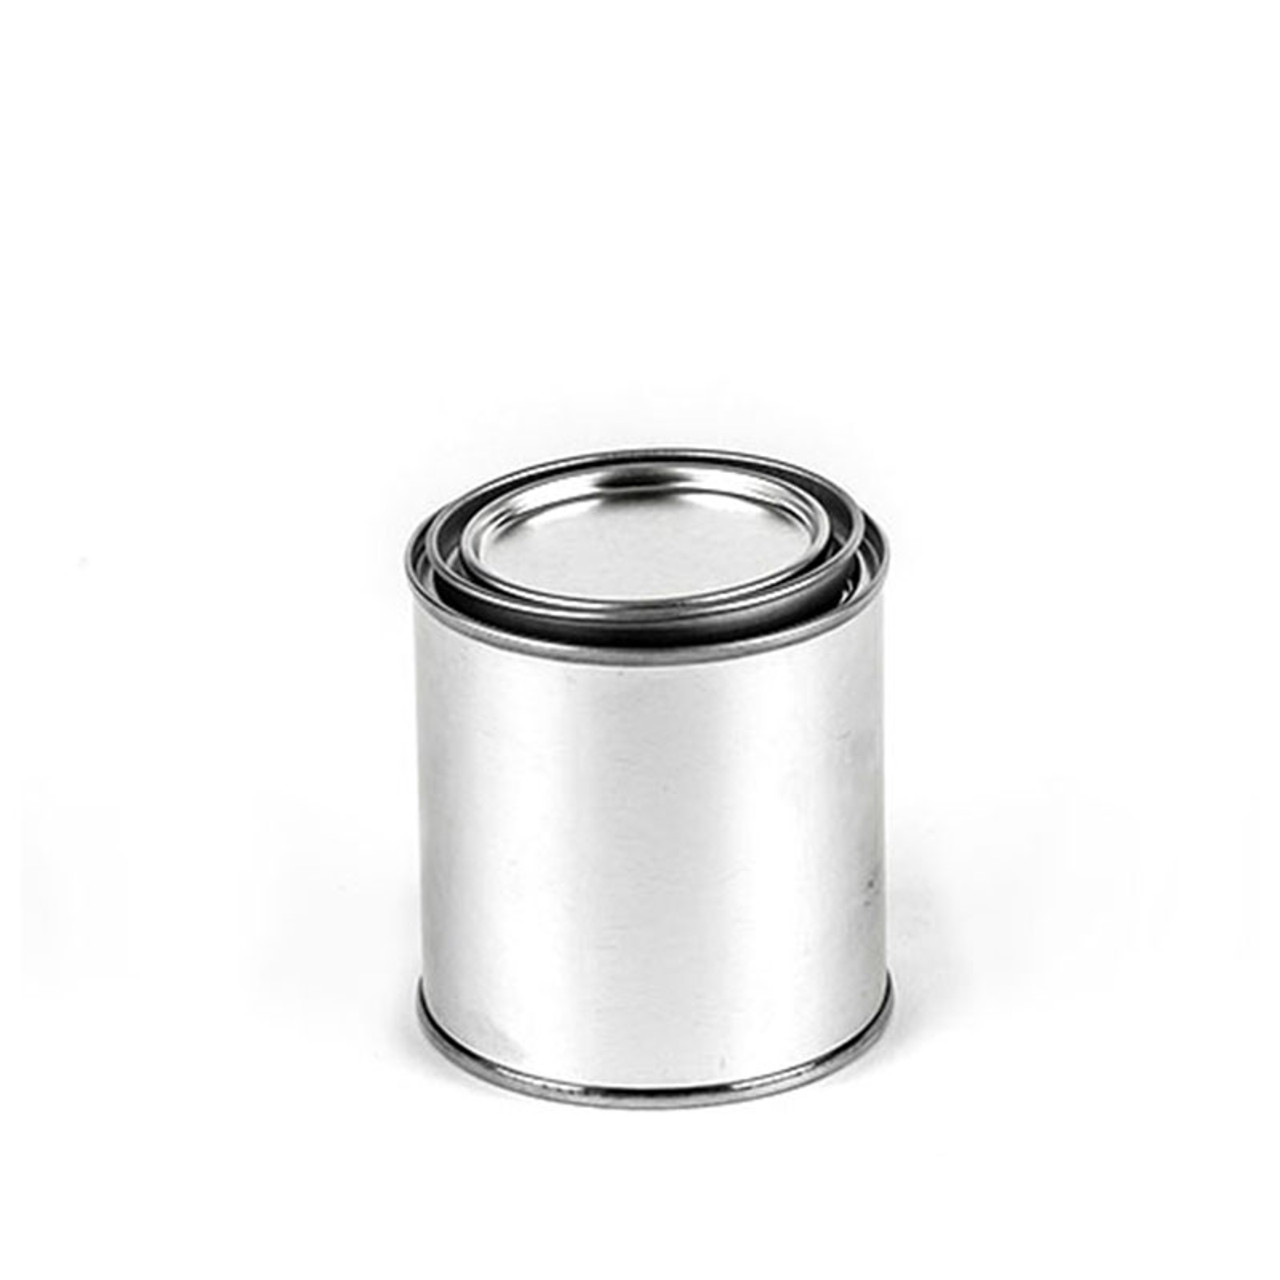 LIYAR 3 Ounce Tins Cans 3 Oz. Tins Containers Round Tins Metal